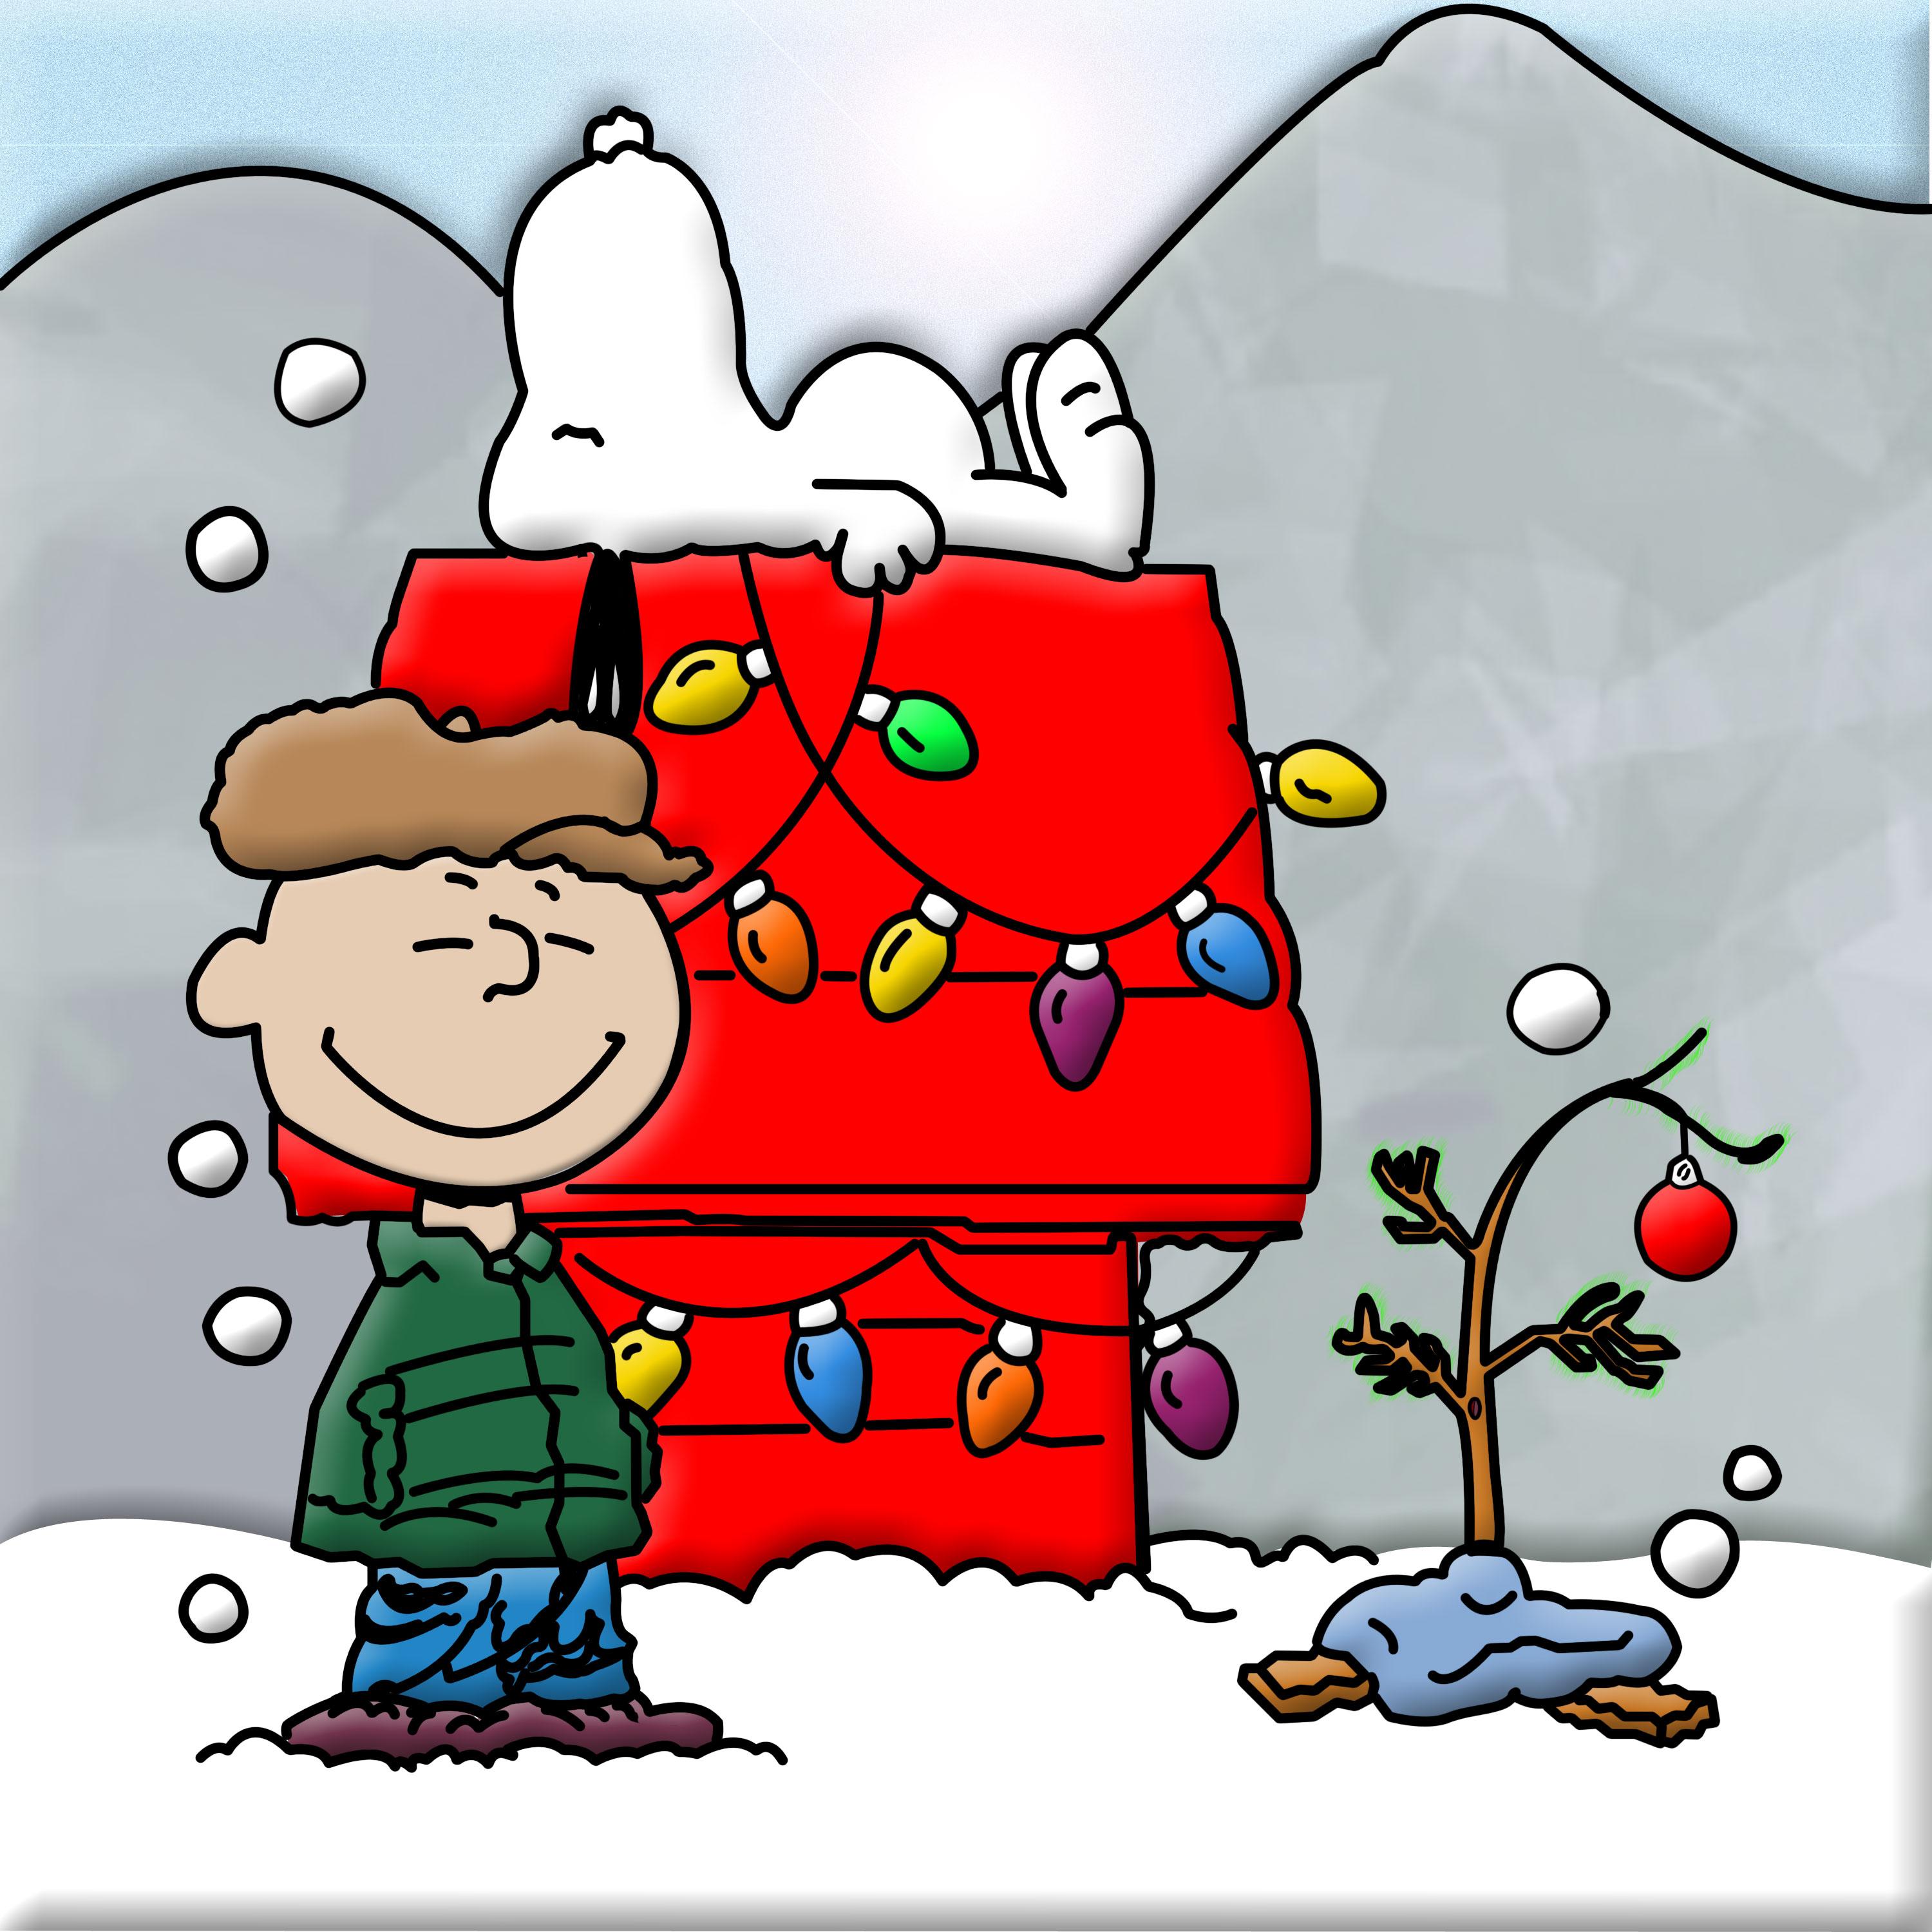 Fine Charlie Brown Christmas Tree Wallpaper in High